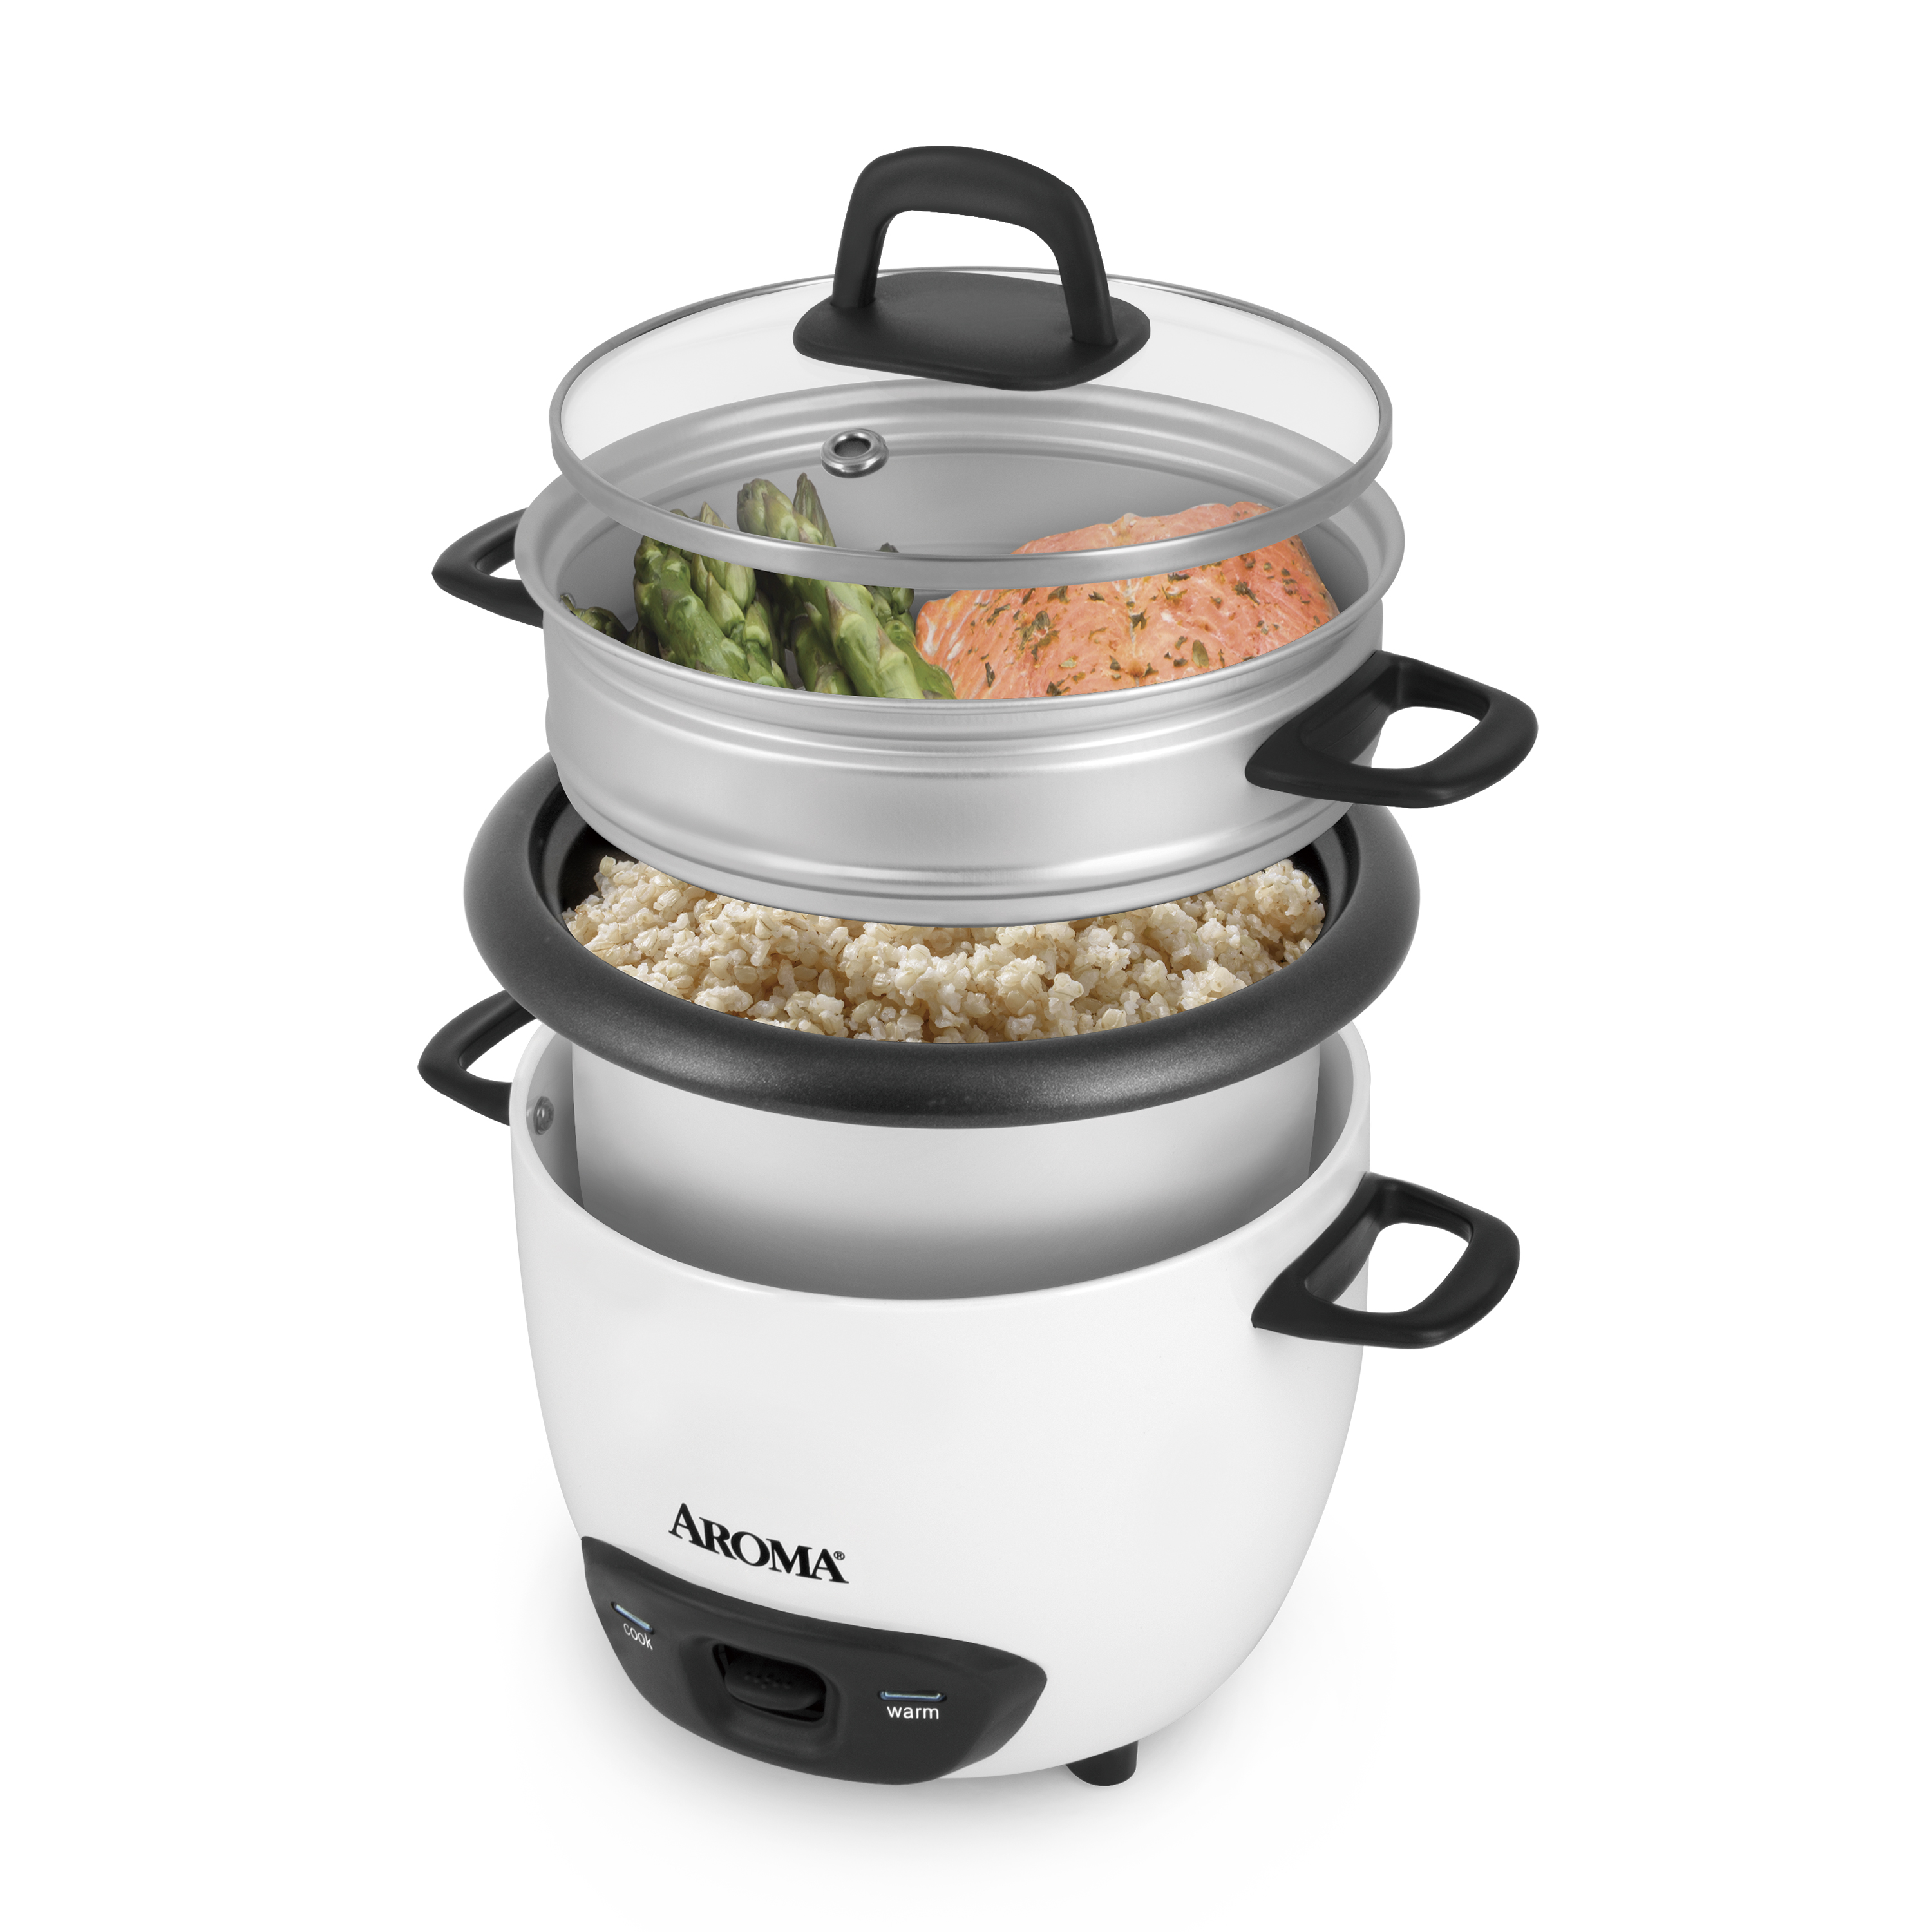 Aroma® 6-Cup (Cooked) / 1.5Qt. Rice & Grain Cooker, White, New, ARC-743-1NG - image 4 of 5